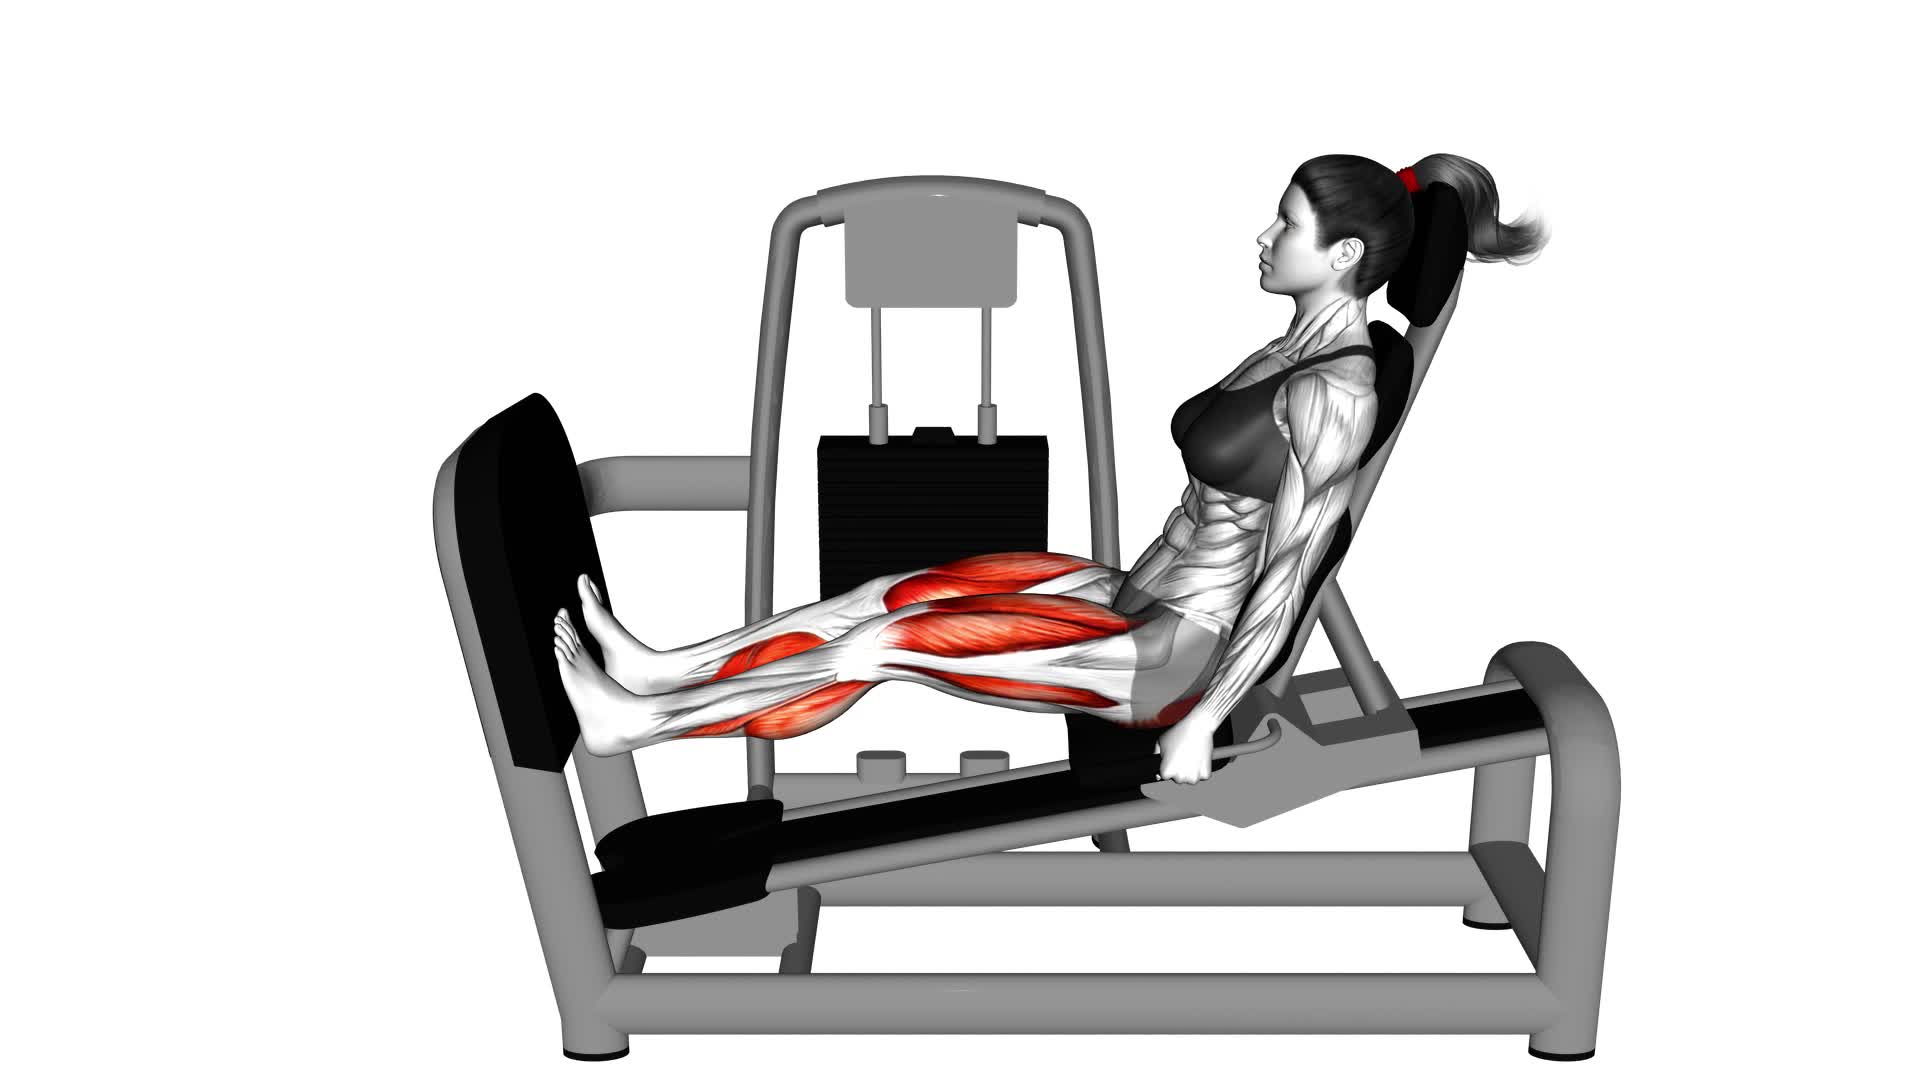 Lever Seated Squat Calf Raise on Leg Press Machine (female) - Video Exercise Guide & Tips